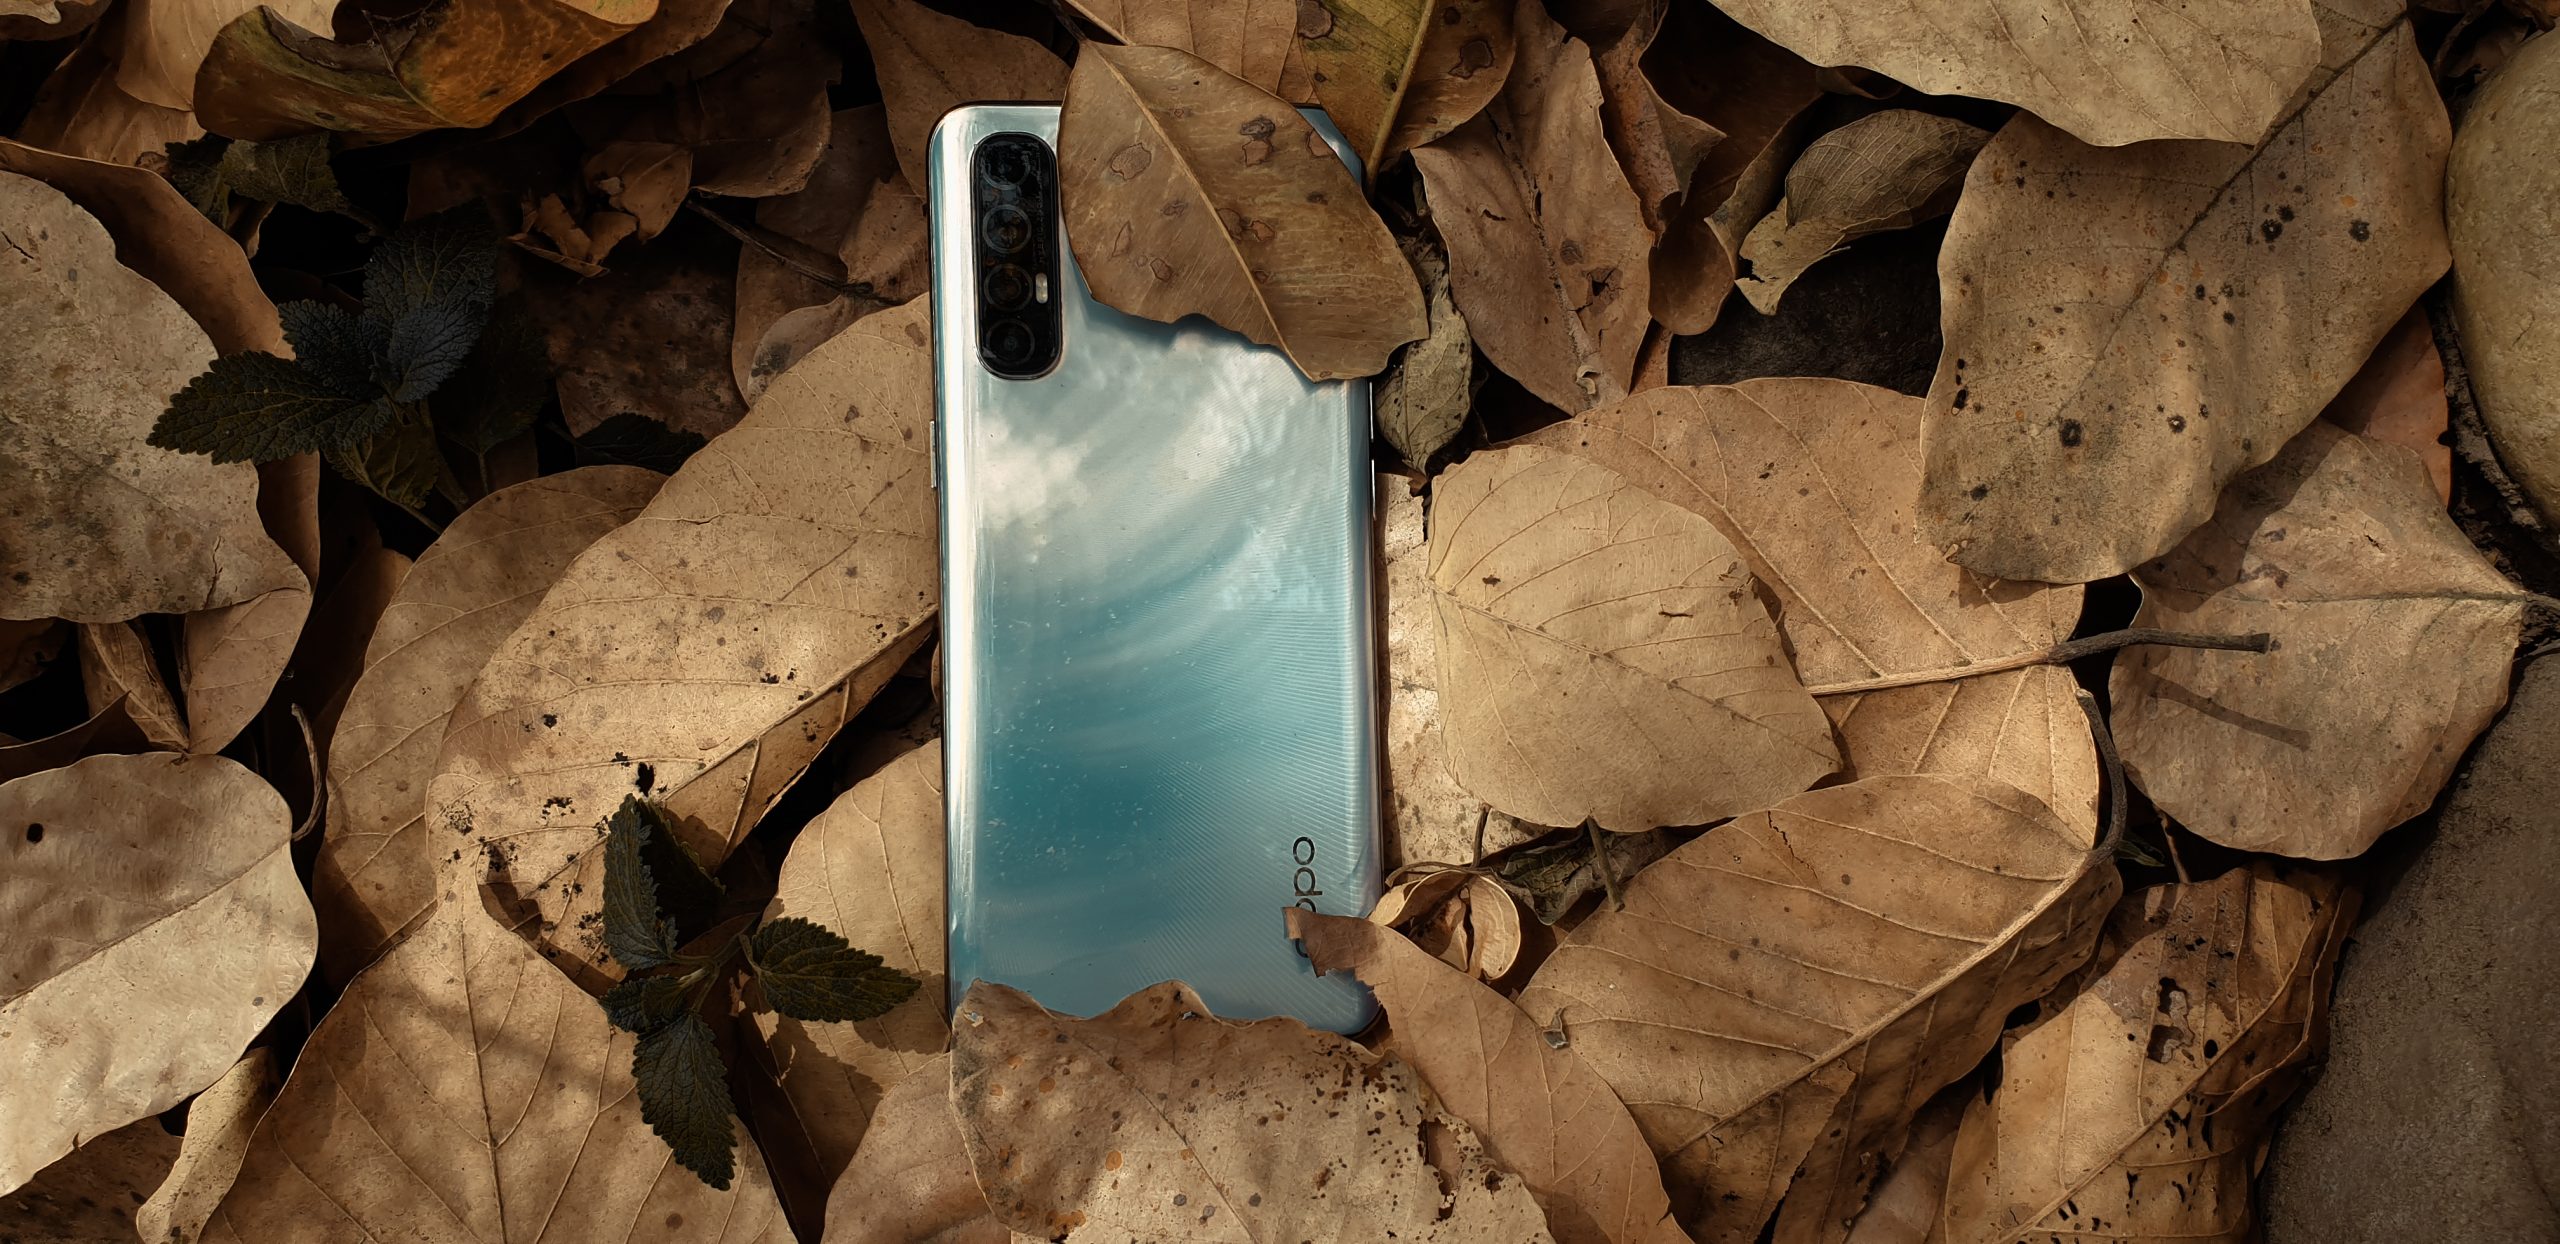 A phone fallen on dry leaves